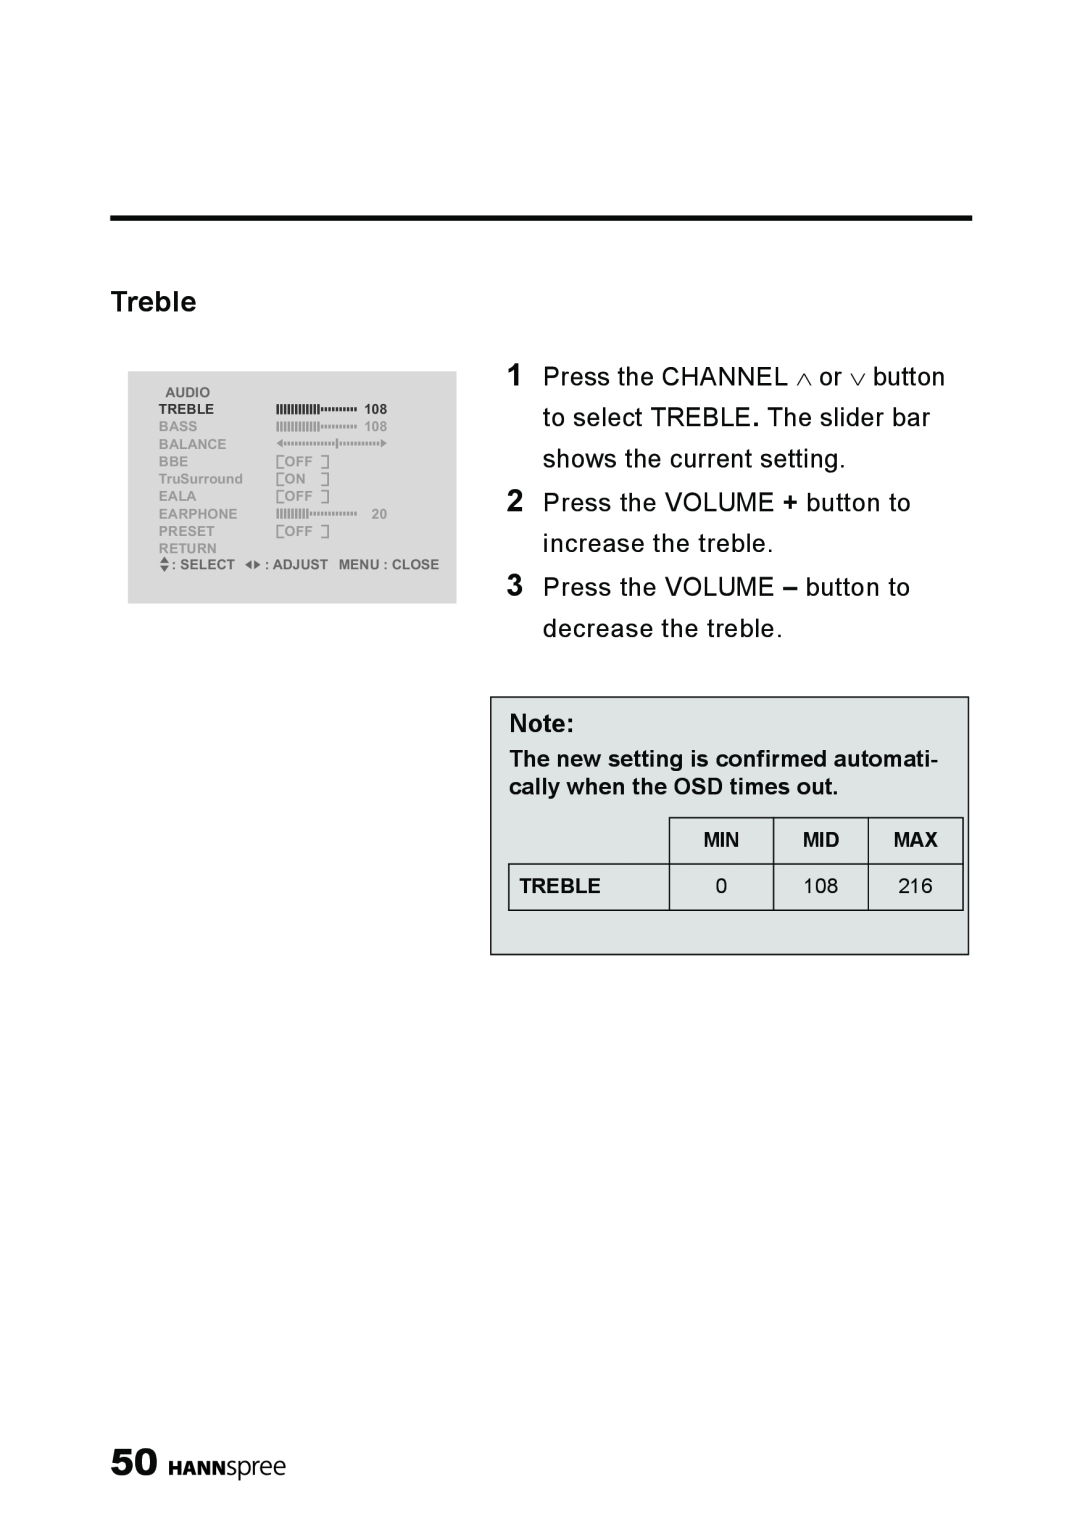 HANNspree LT11-23A1 user manual Treble, The new setting is confirmed automati- cally when the OSD times out, Audio, Select 